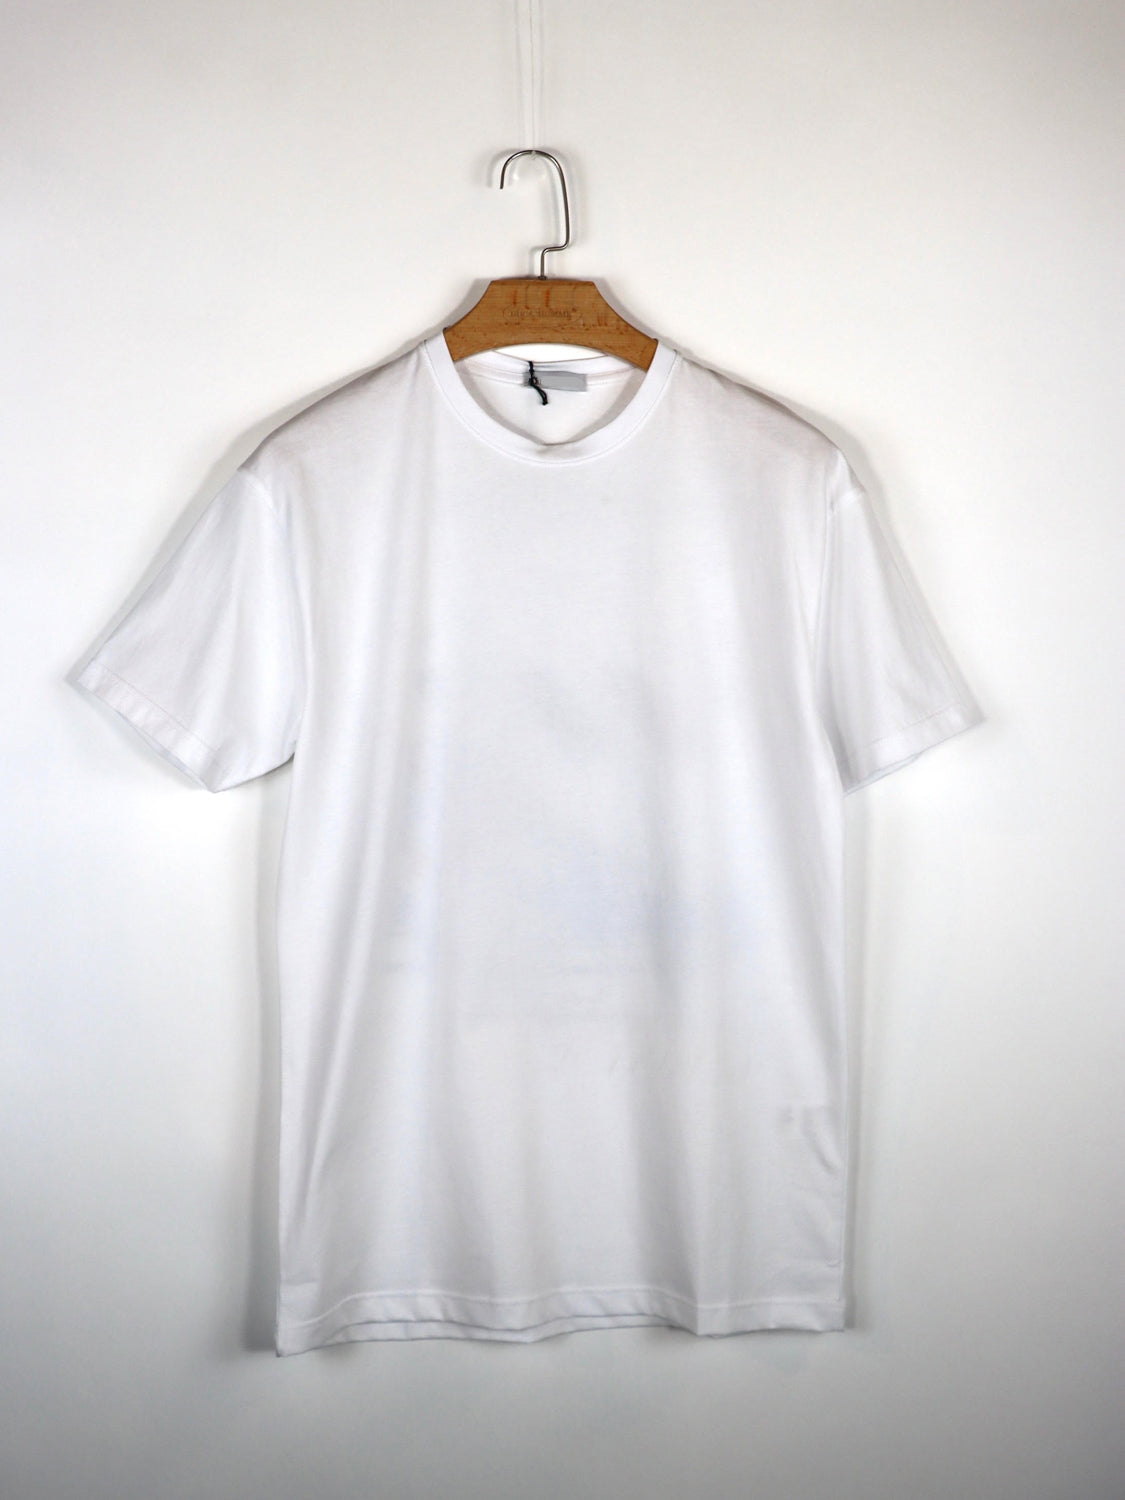 T-SHIRT "LIMITED EDITION" - Col. Bianco